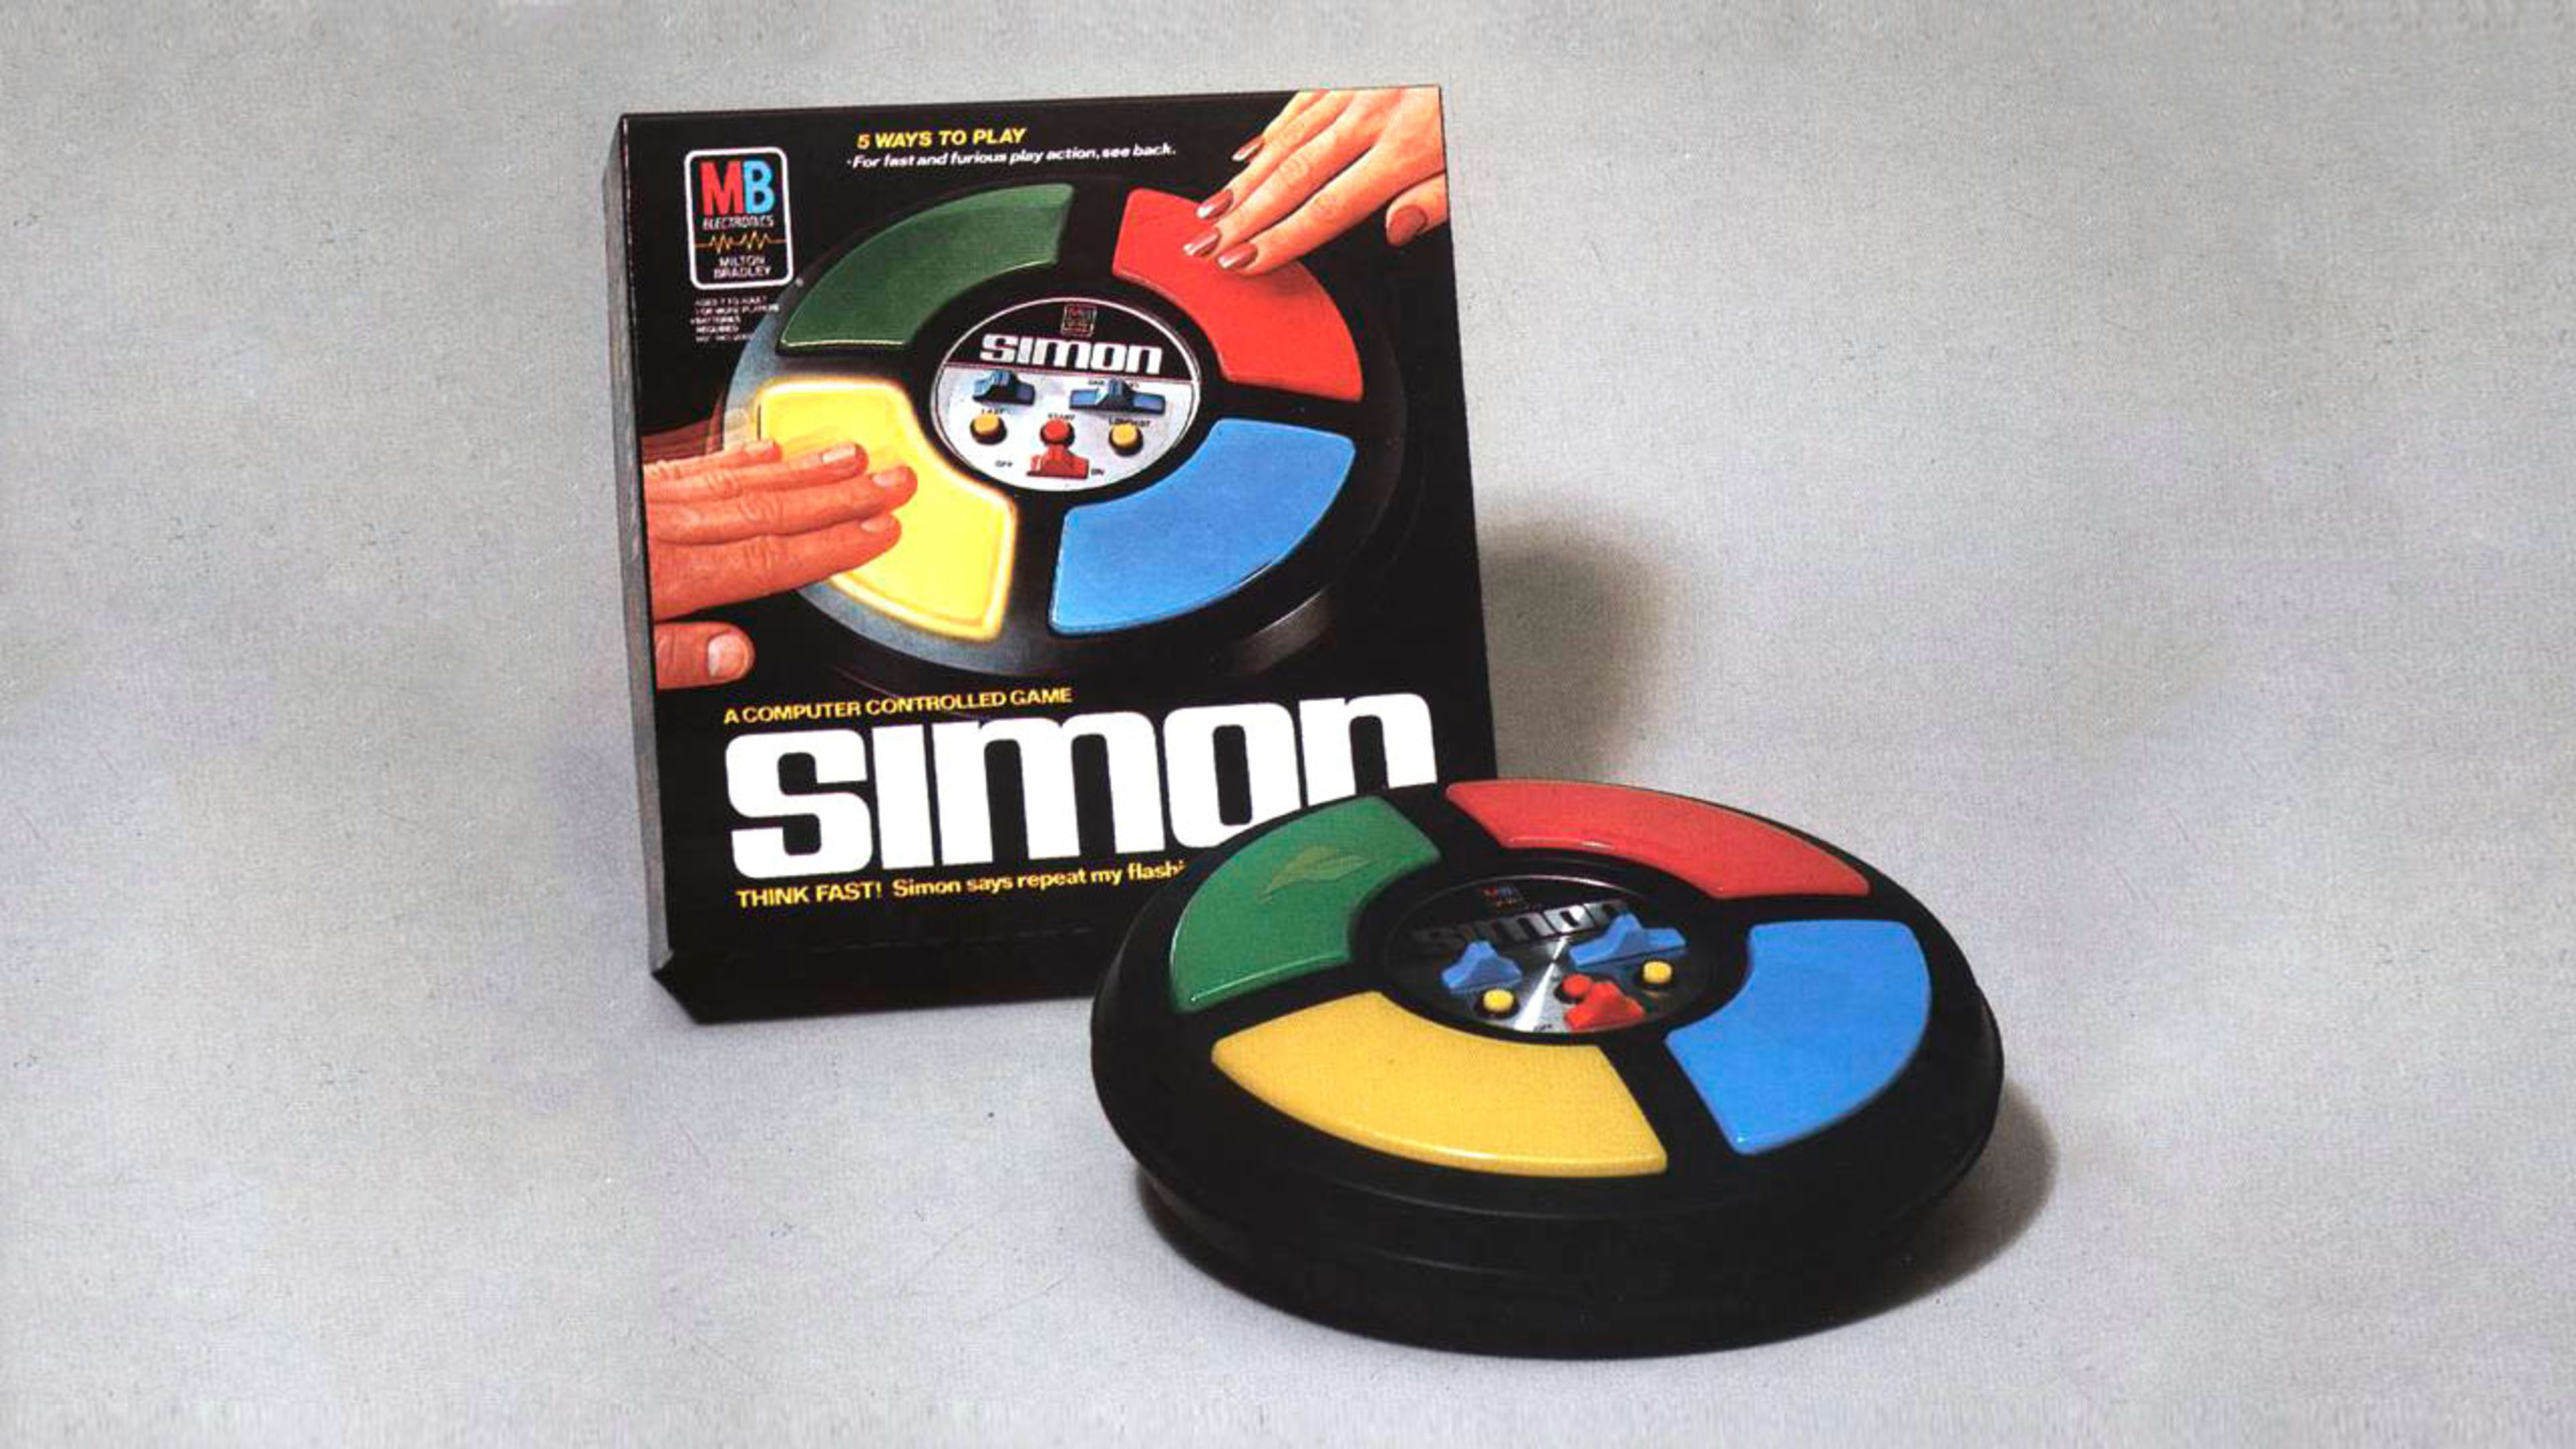 40 Years Of Simon, The Electronic Game That Never Stops